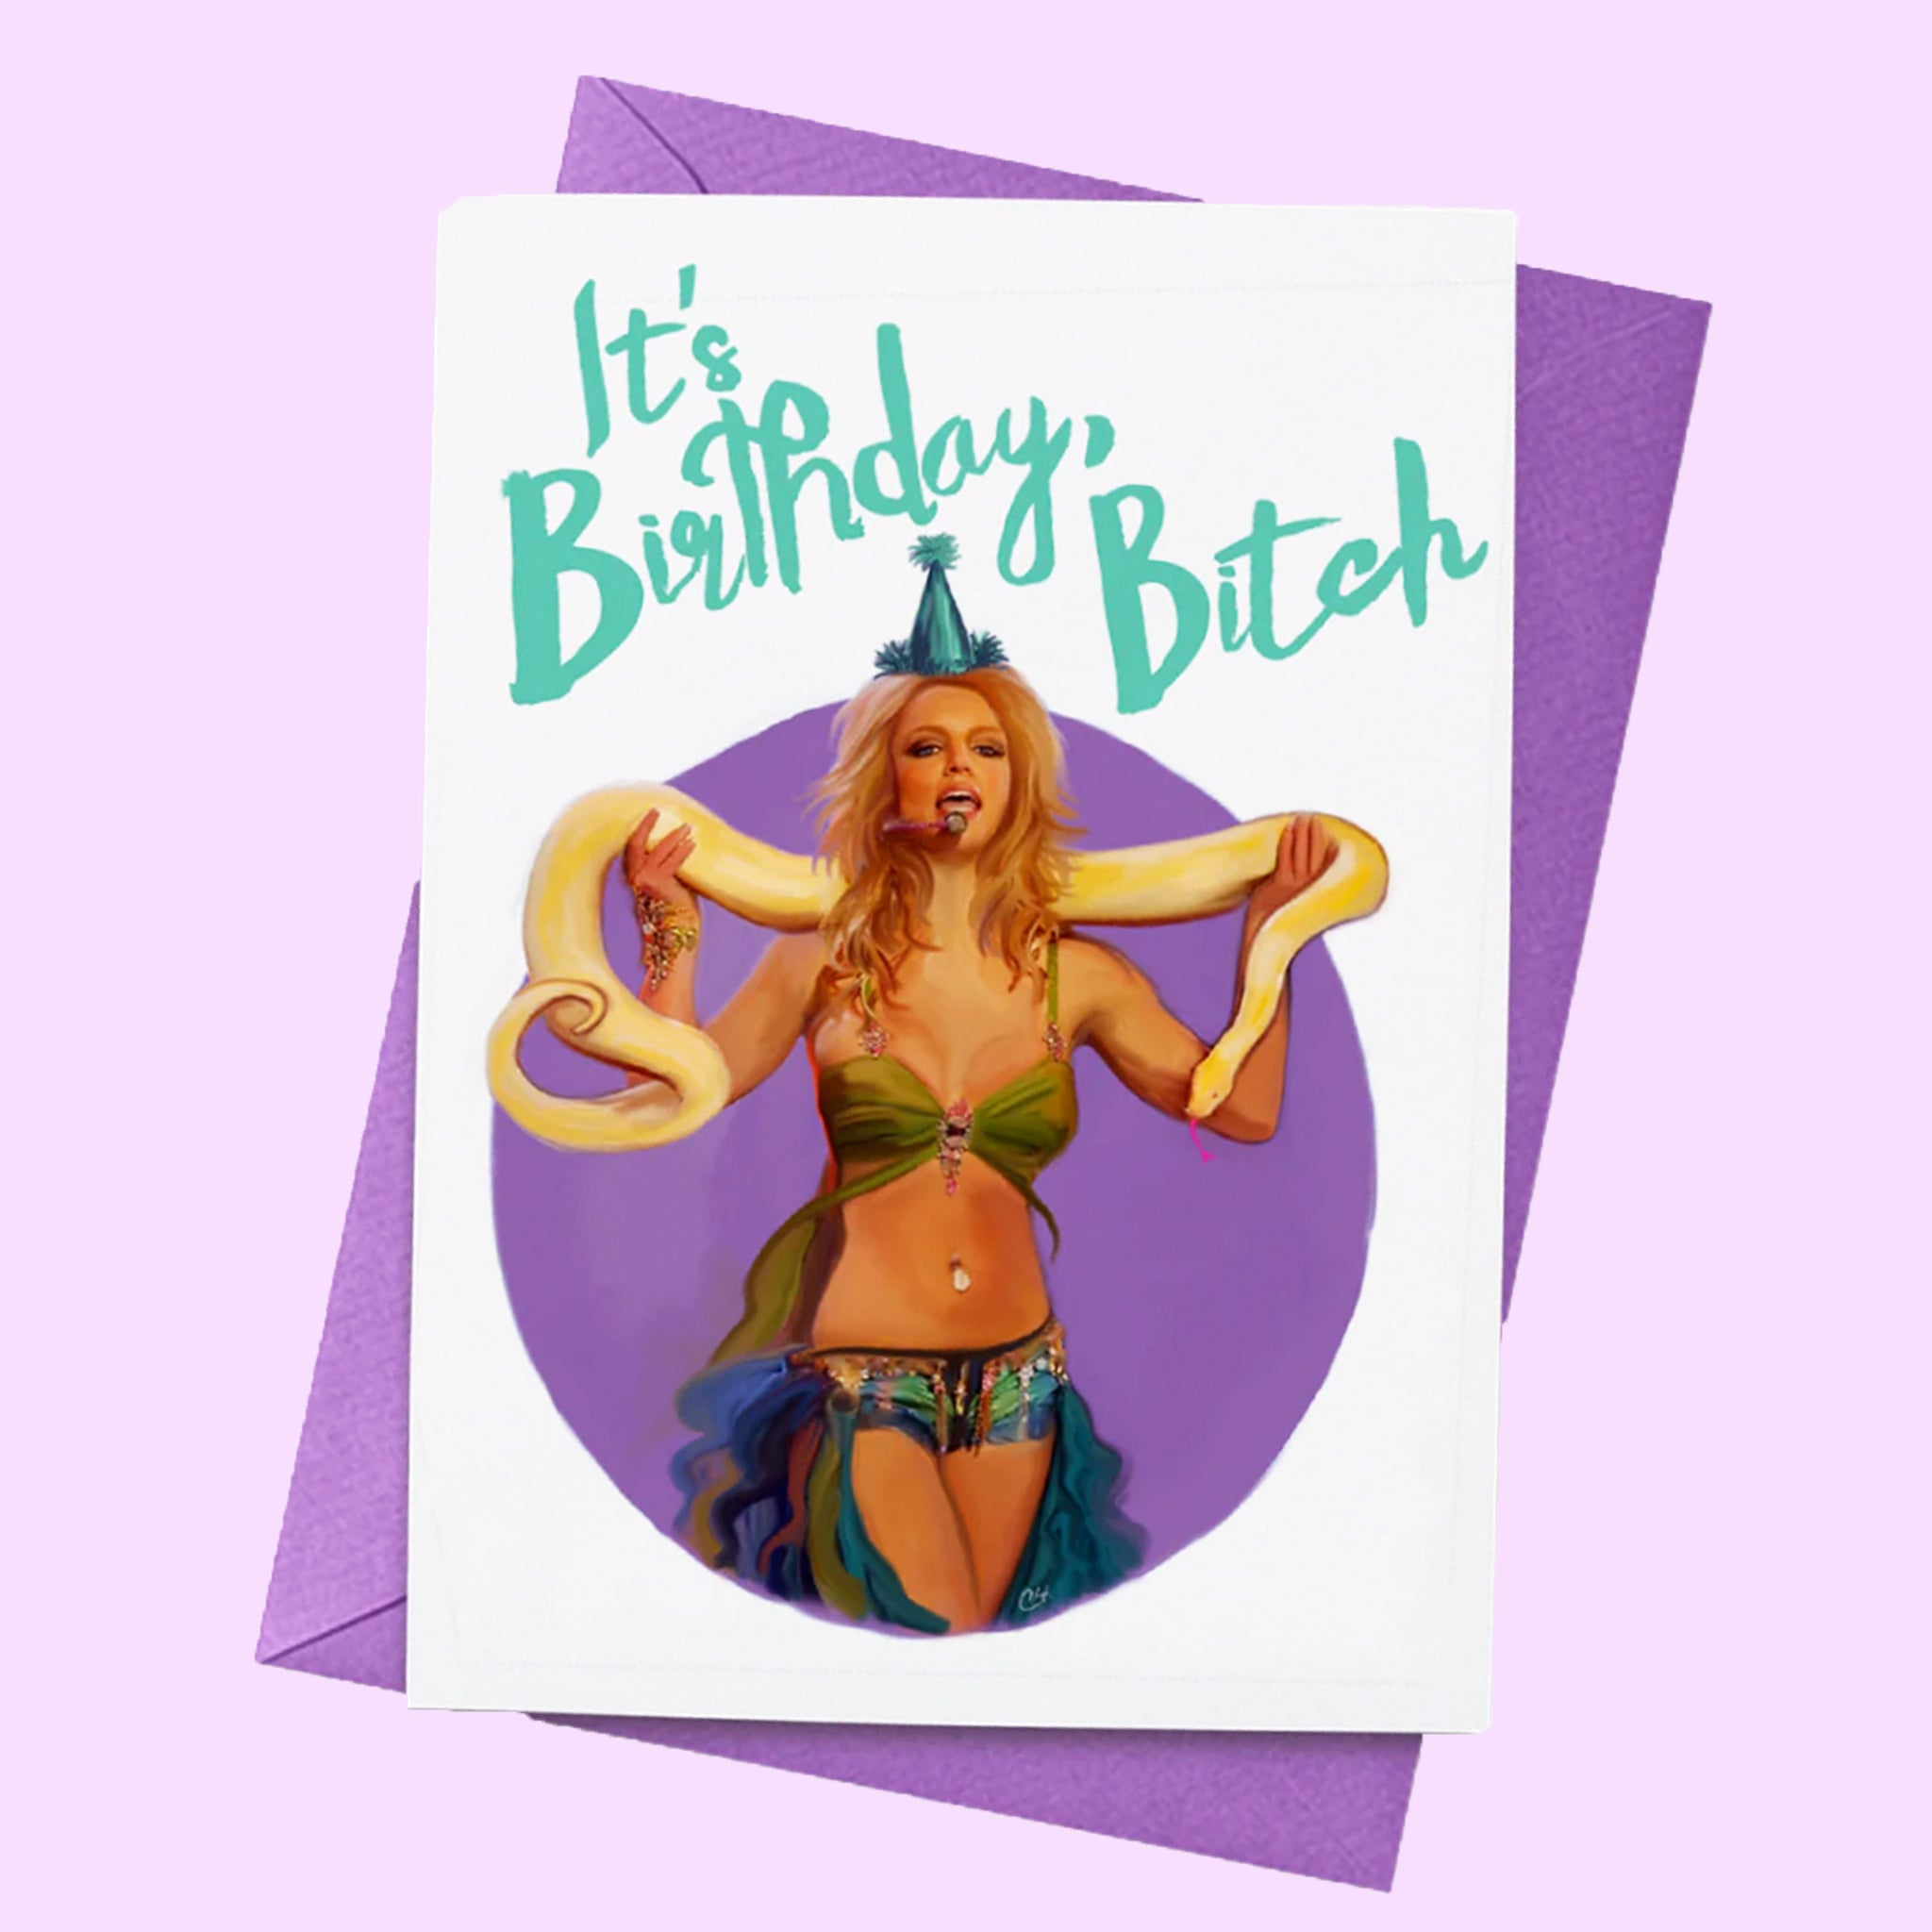 White greeting card with illustration of Britney Spears performing with boa snake and wearing party hat, with text "It's Birthday, Bitch" in teal text, with purple envelope.